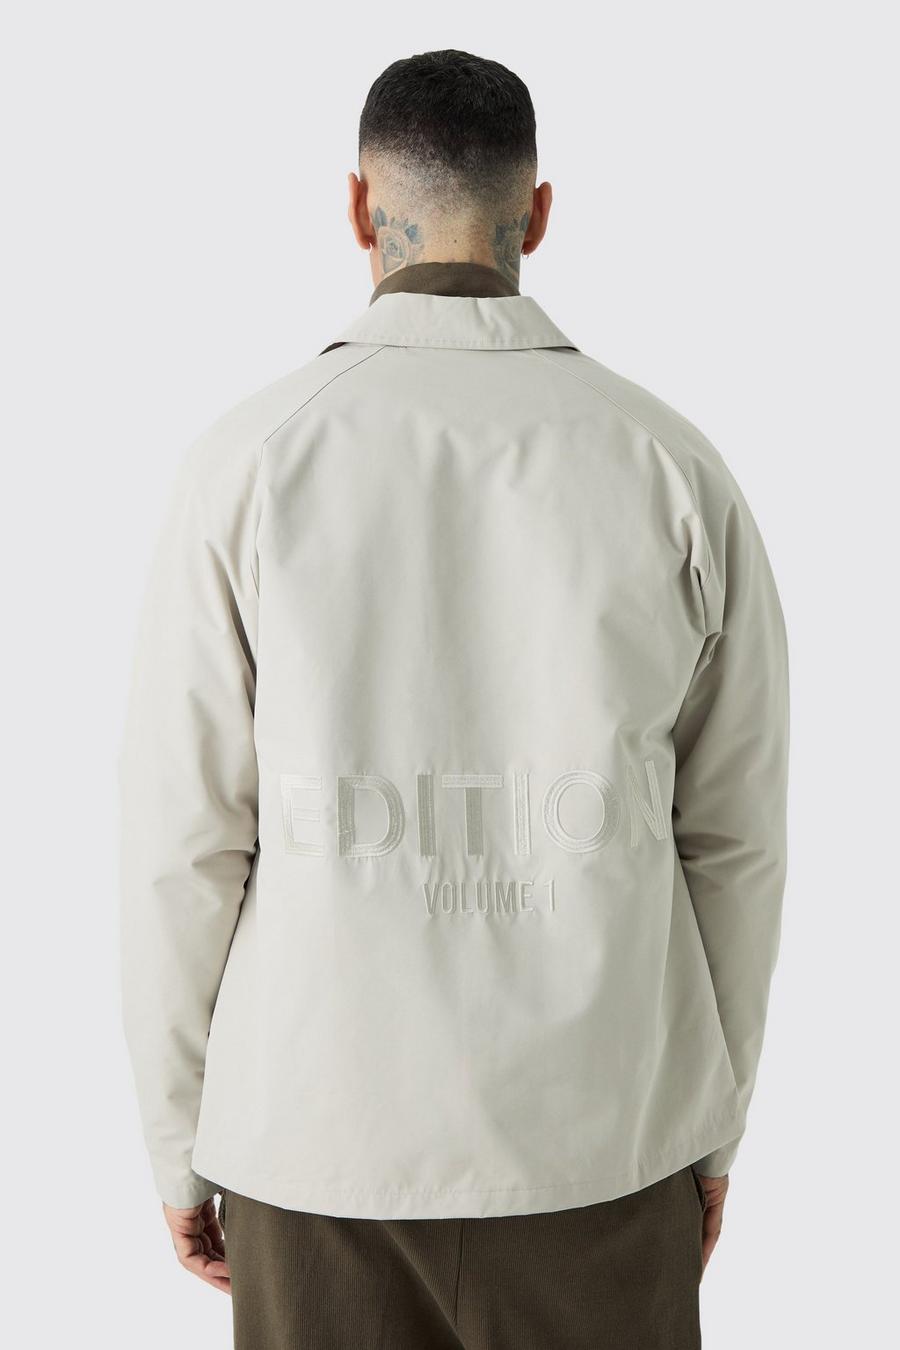 Stone Tall EDITION Heavyweight Twill Embroidered Coach Jacket